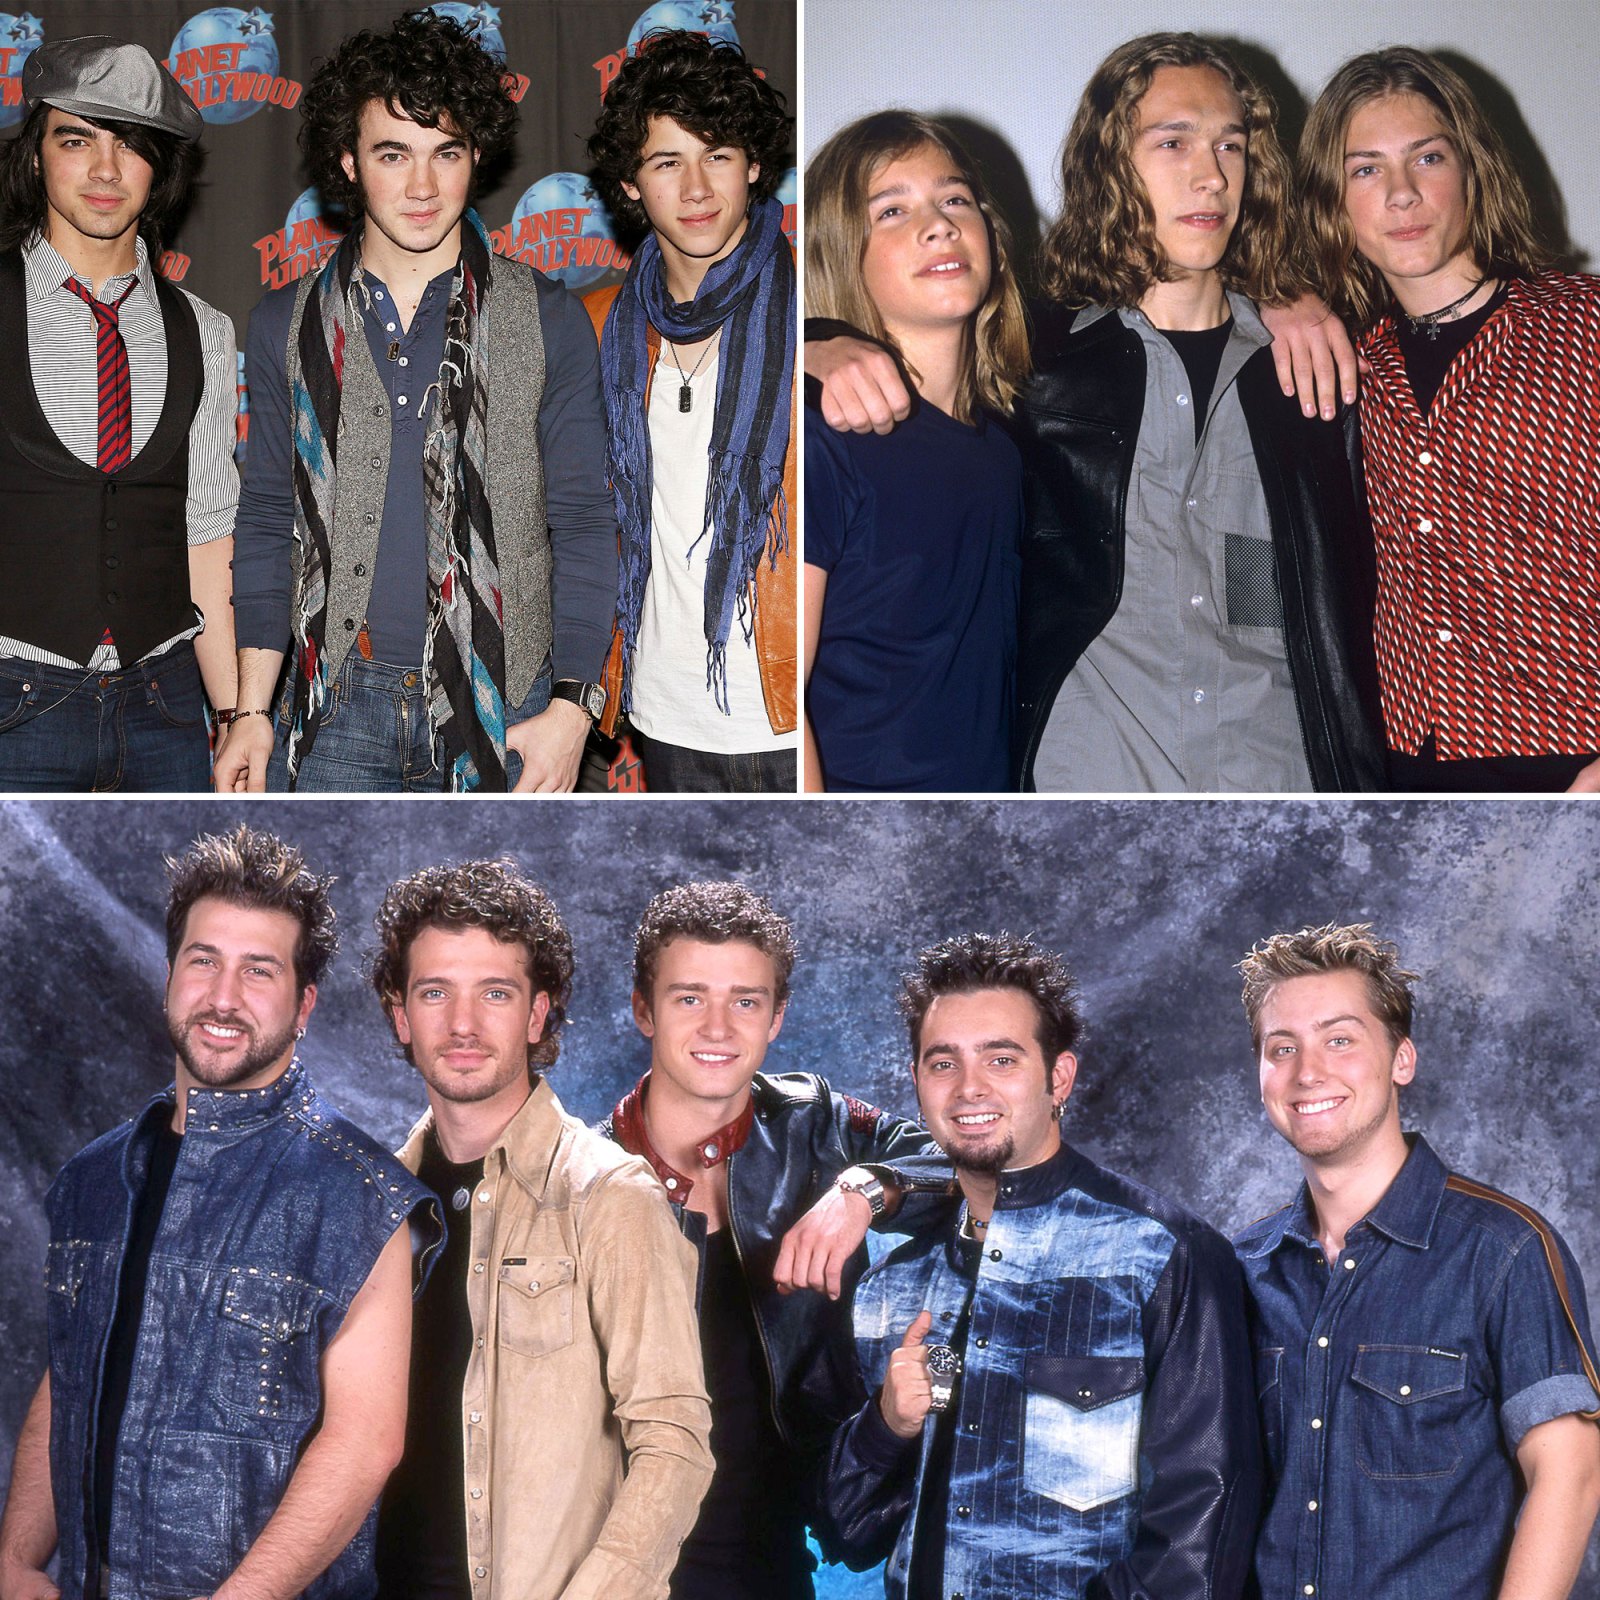 Boy 5 Yaer Xxx - Biggest Boy Bands of All Time: One Direction, 'NSync, More